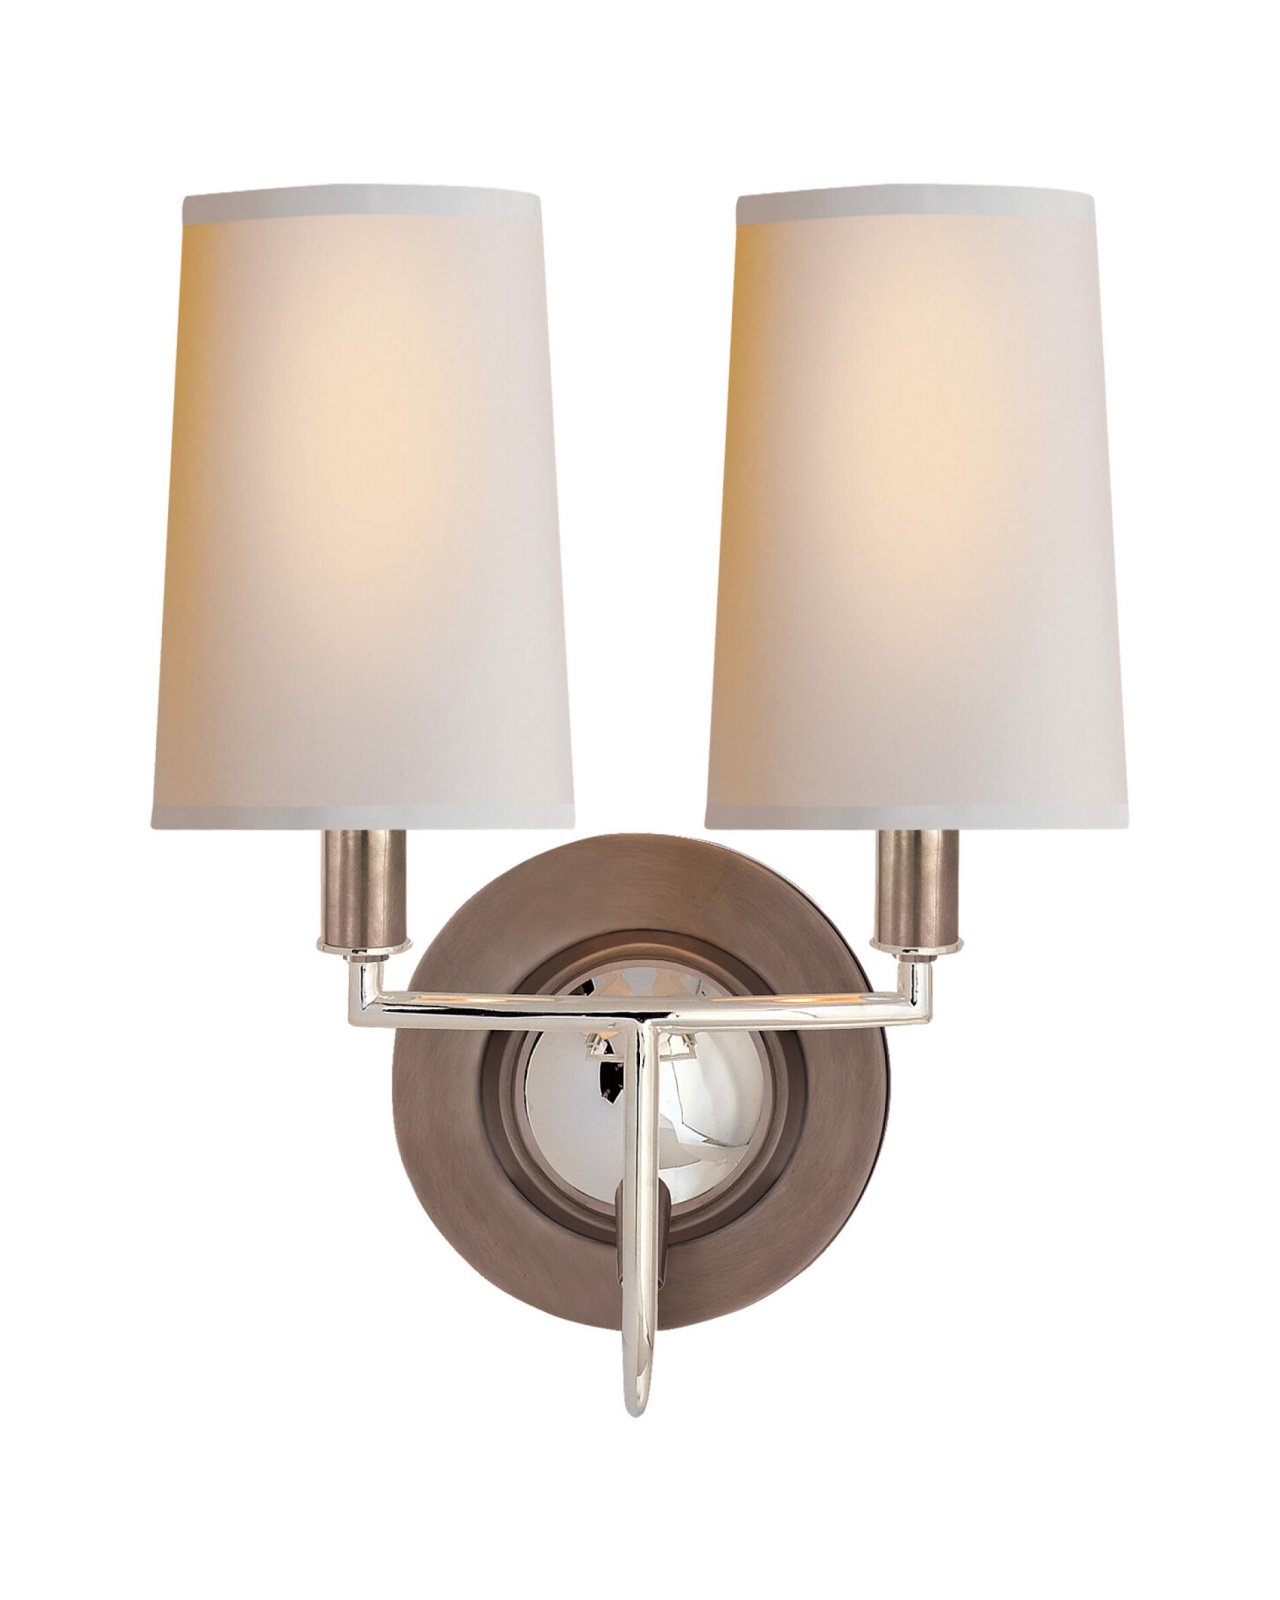 Elkins Double Sconce Antique Nickel and Polished Nickel